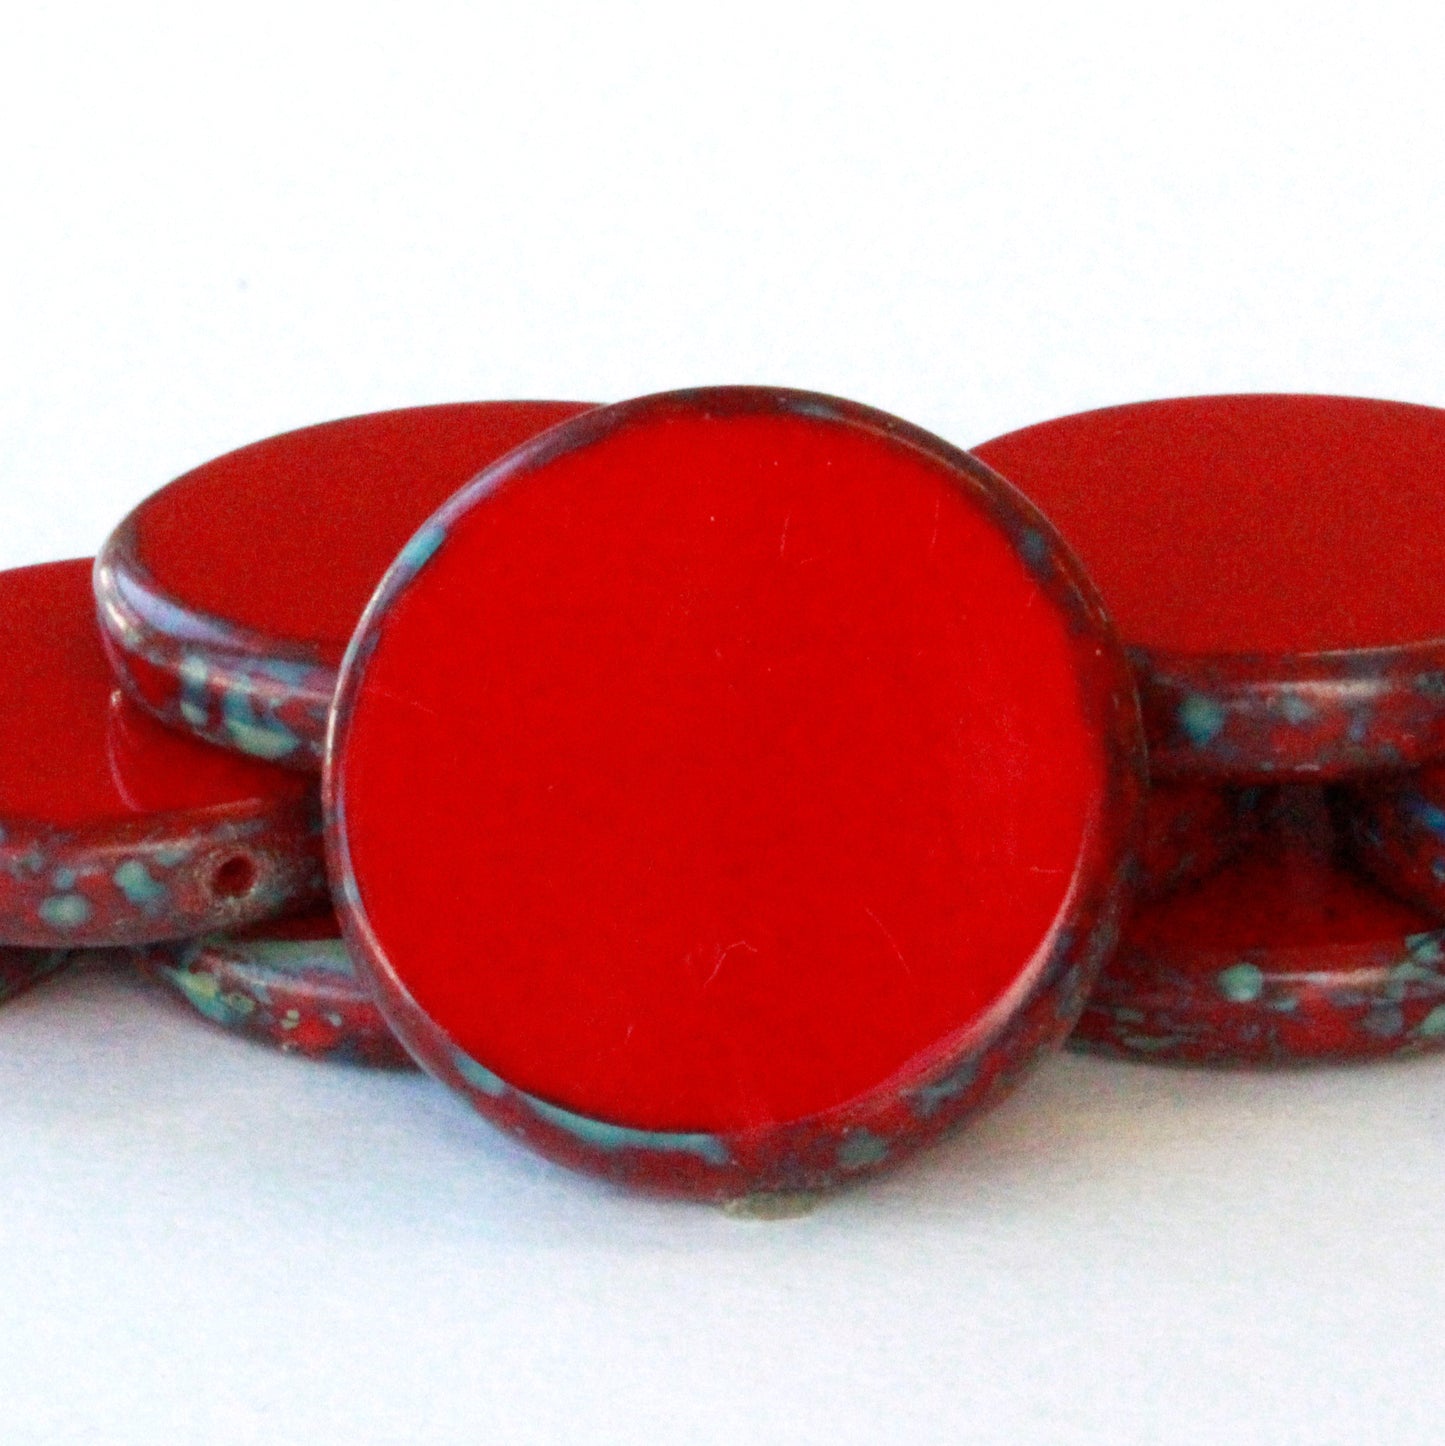 27mm Irregular Coin - Opaque Red Picasso - 2 or 6